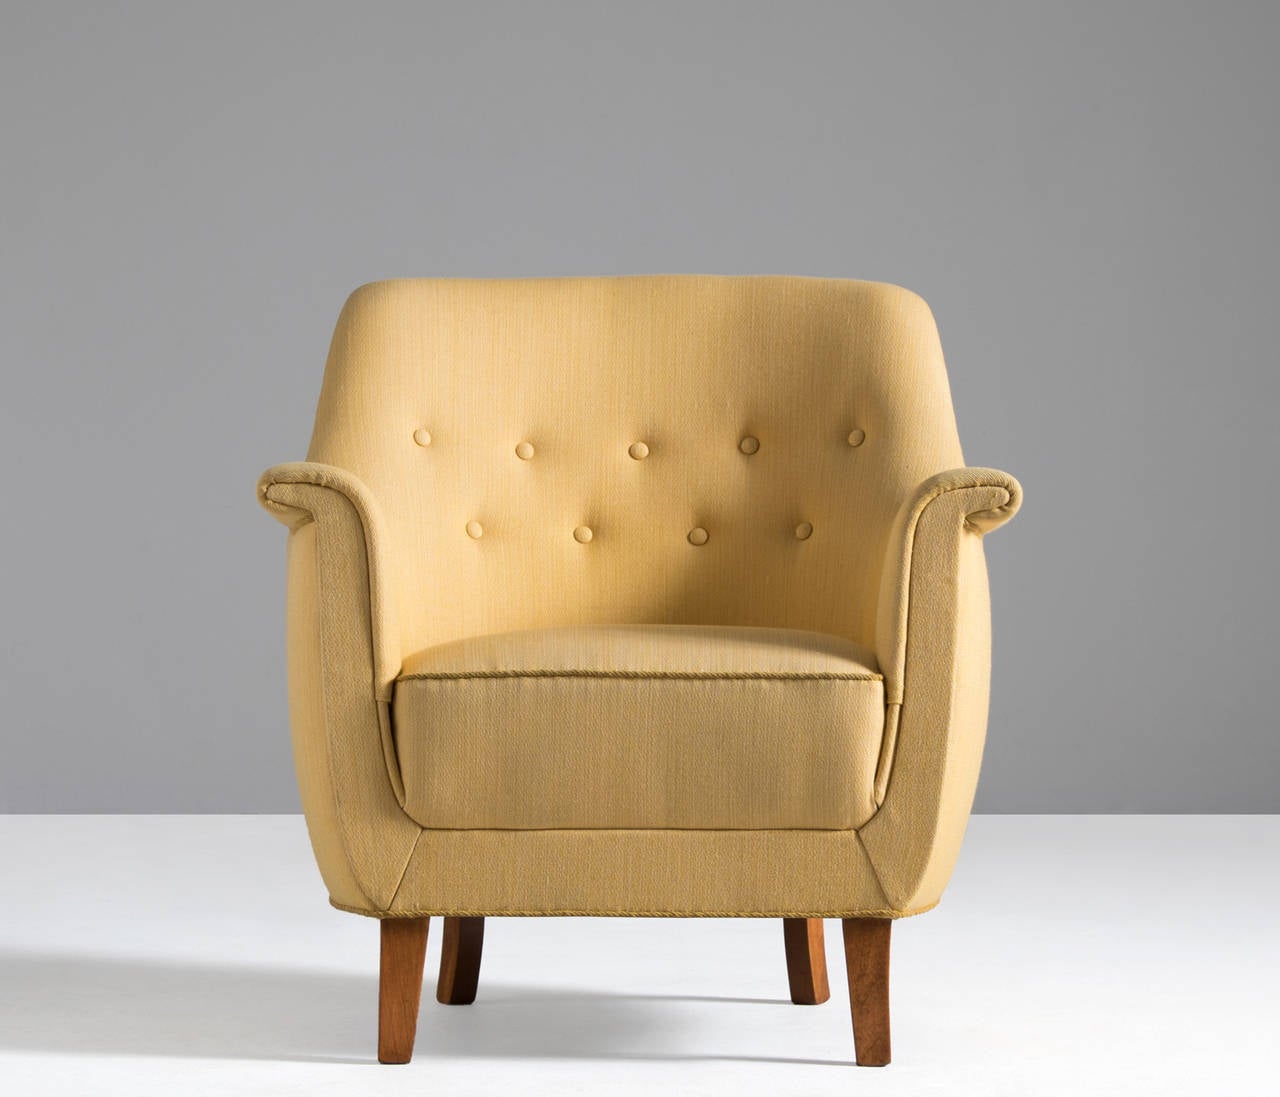 Danish elegant easy chair. The beautifully solid slightly tapered legs compliments the design of the seat perfectly. 

This easy chair is currently covered in original yellow upholstery. Re-upholstery is optional. Please ask our specialist for the